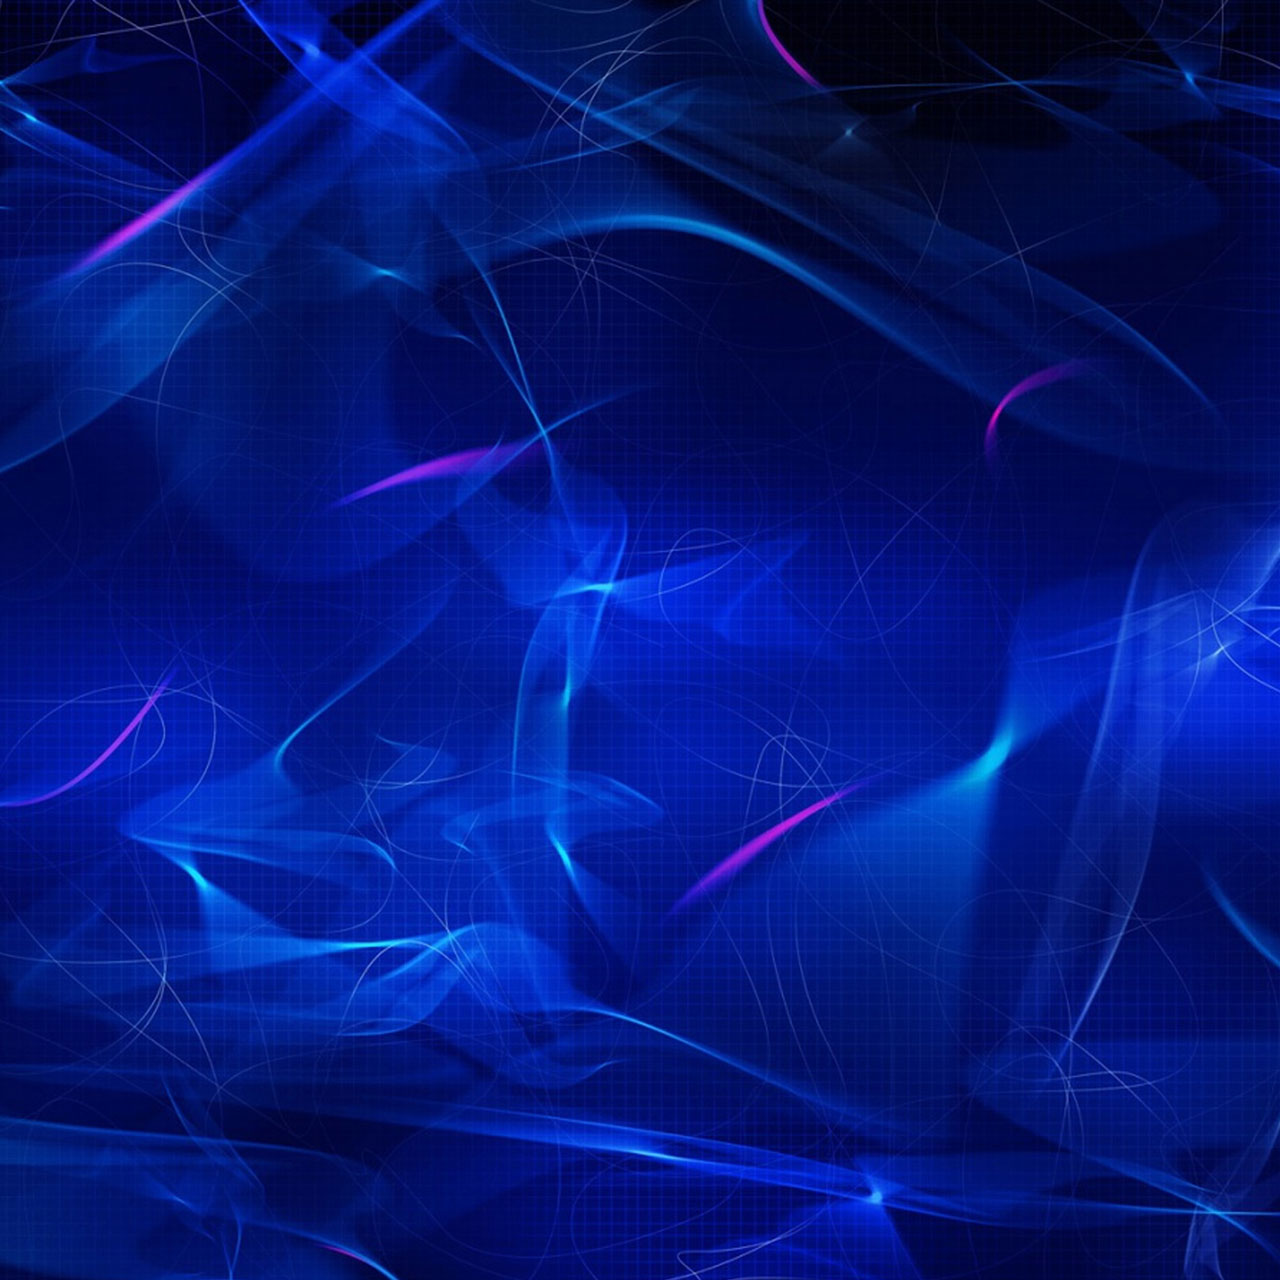 Abstract Blue Samsung Galaxy Tab 10 wallpapers | Tablet wallpapers ...